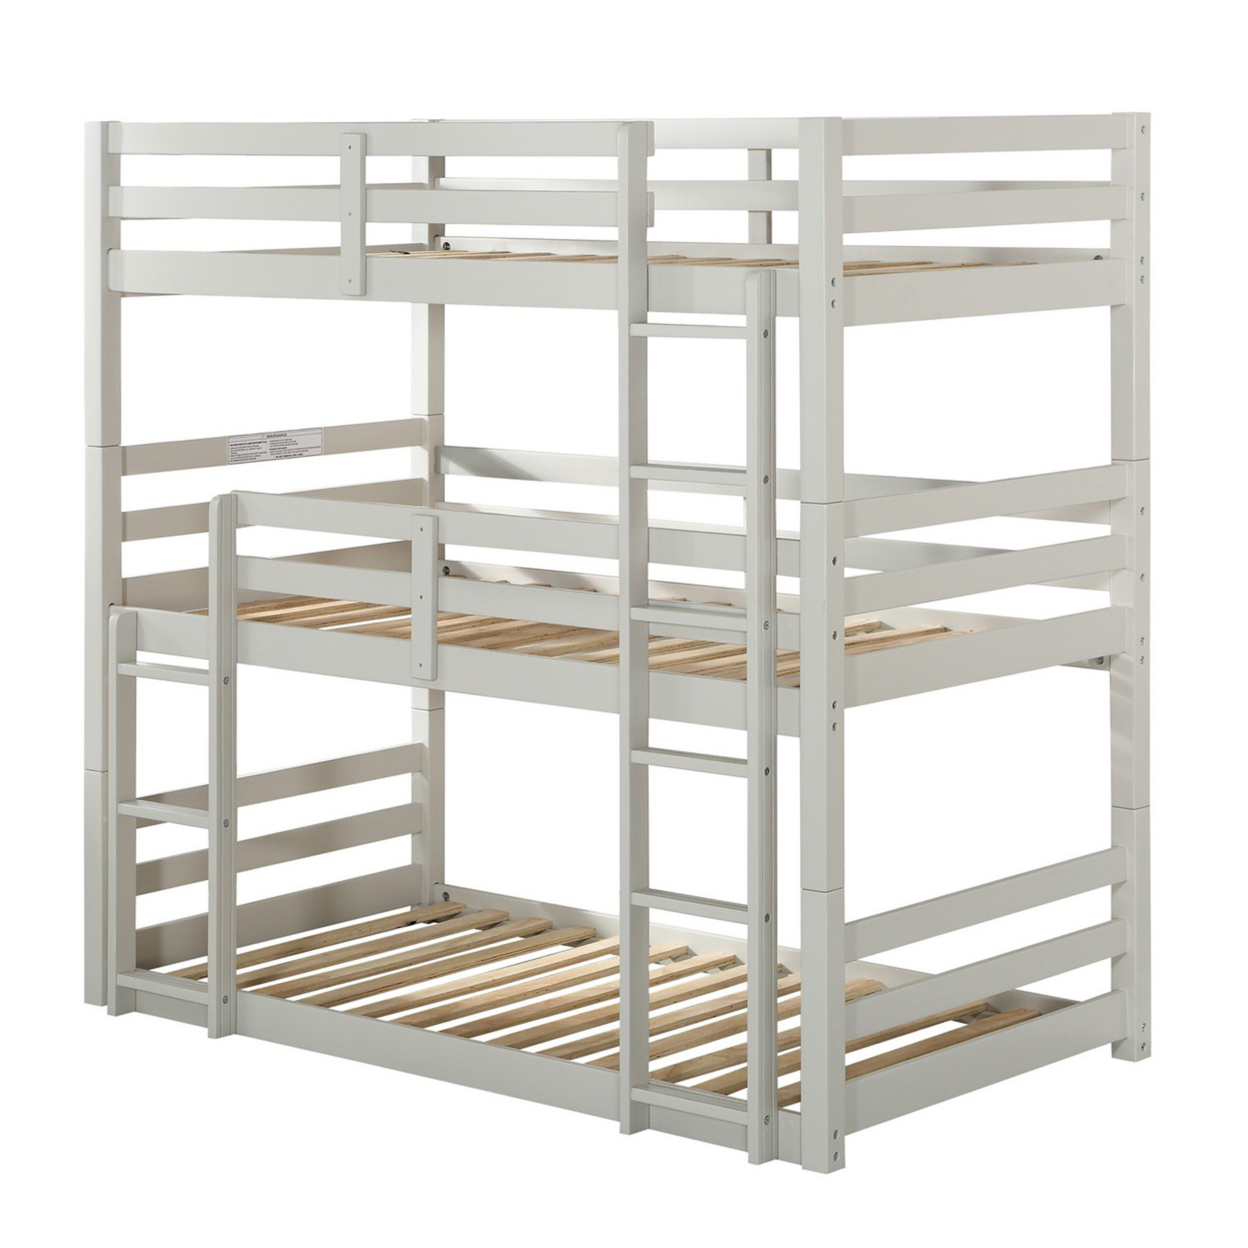 Twin Size 3 Tier Wooden Bunk Bed With Ladder, White- Saltoro Sherpi